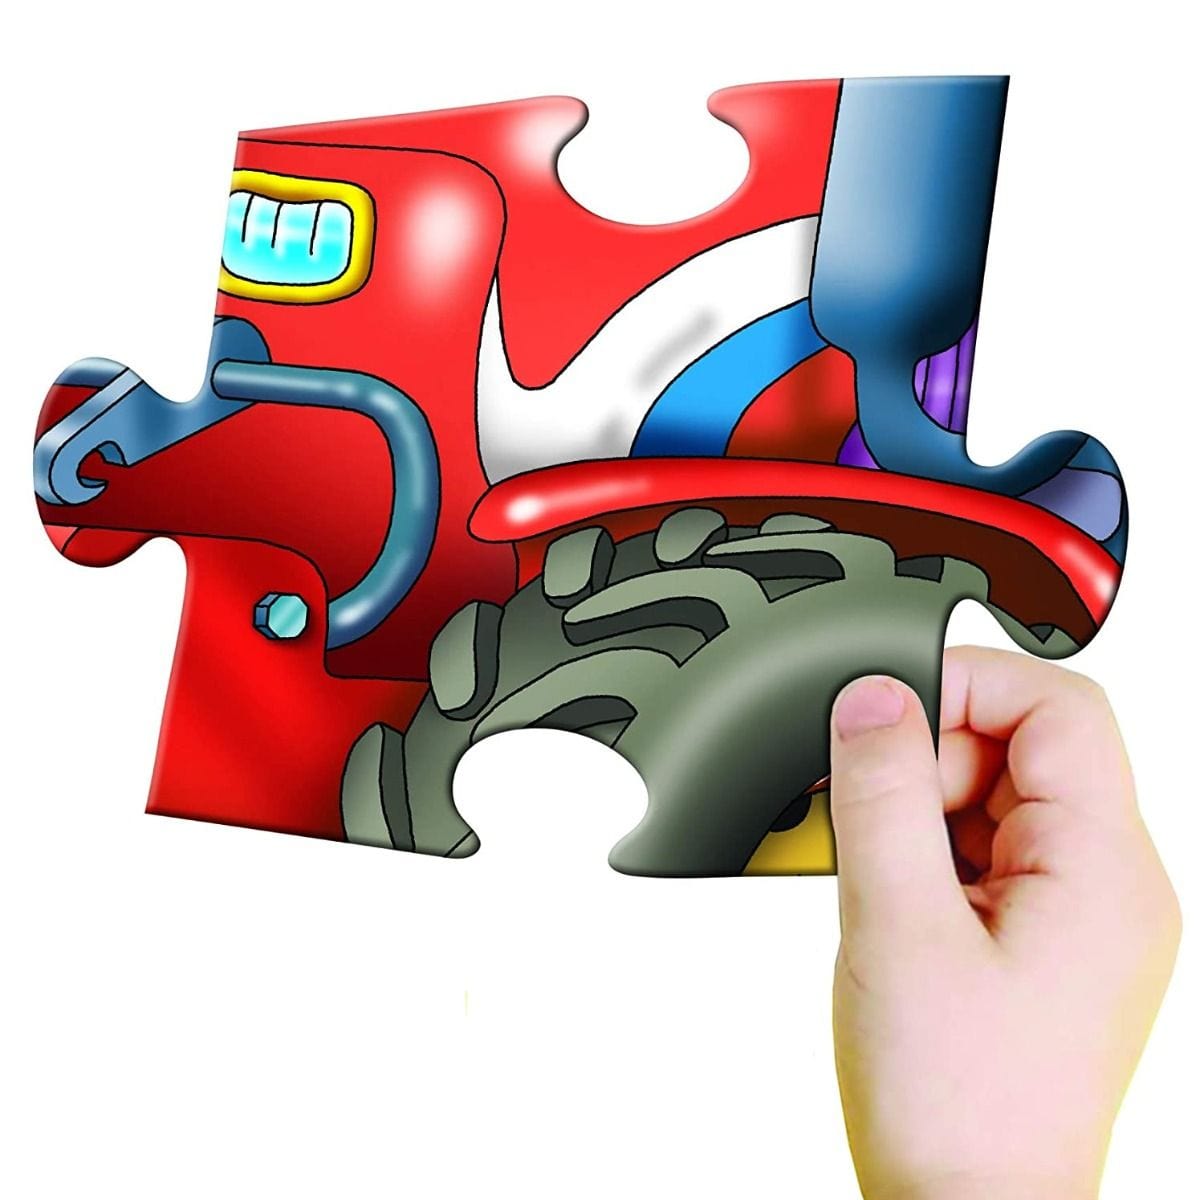 Tractor - 15 PCS Floor Puzzle | Frank by Frank Puzzle